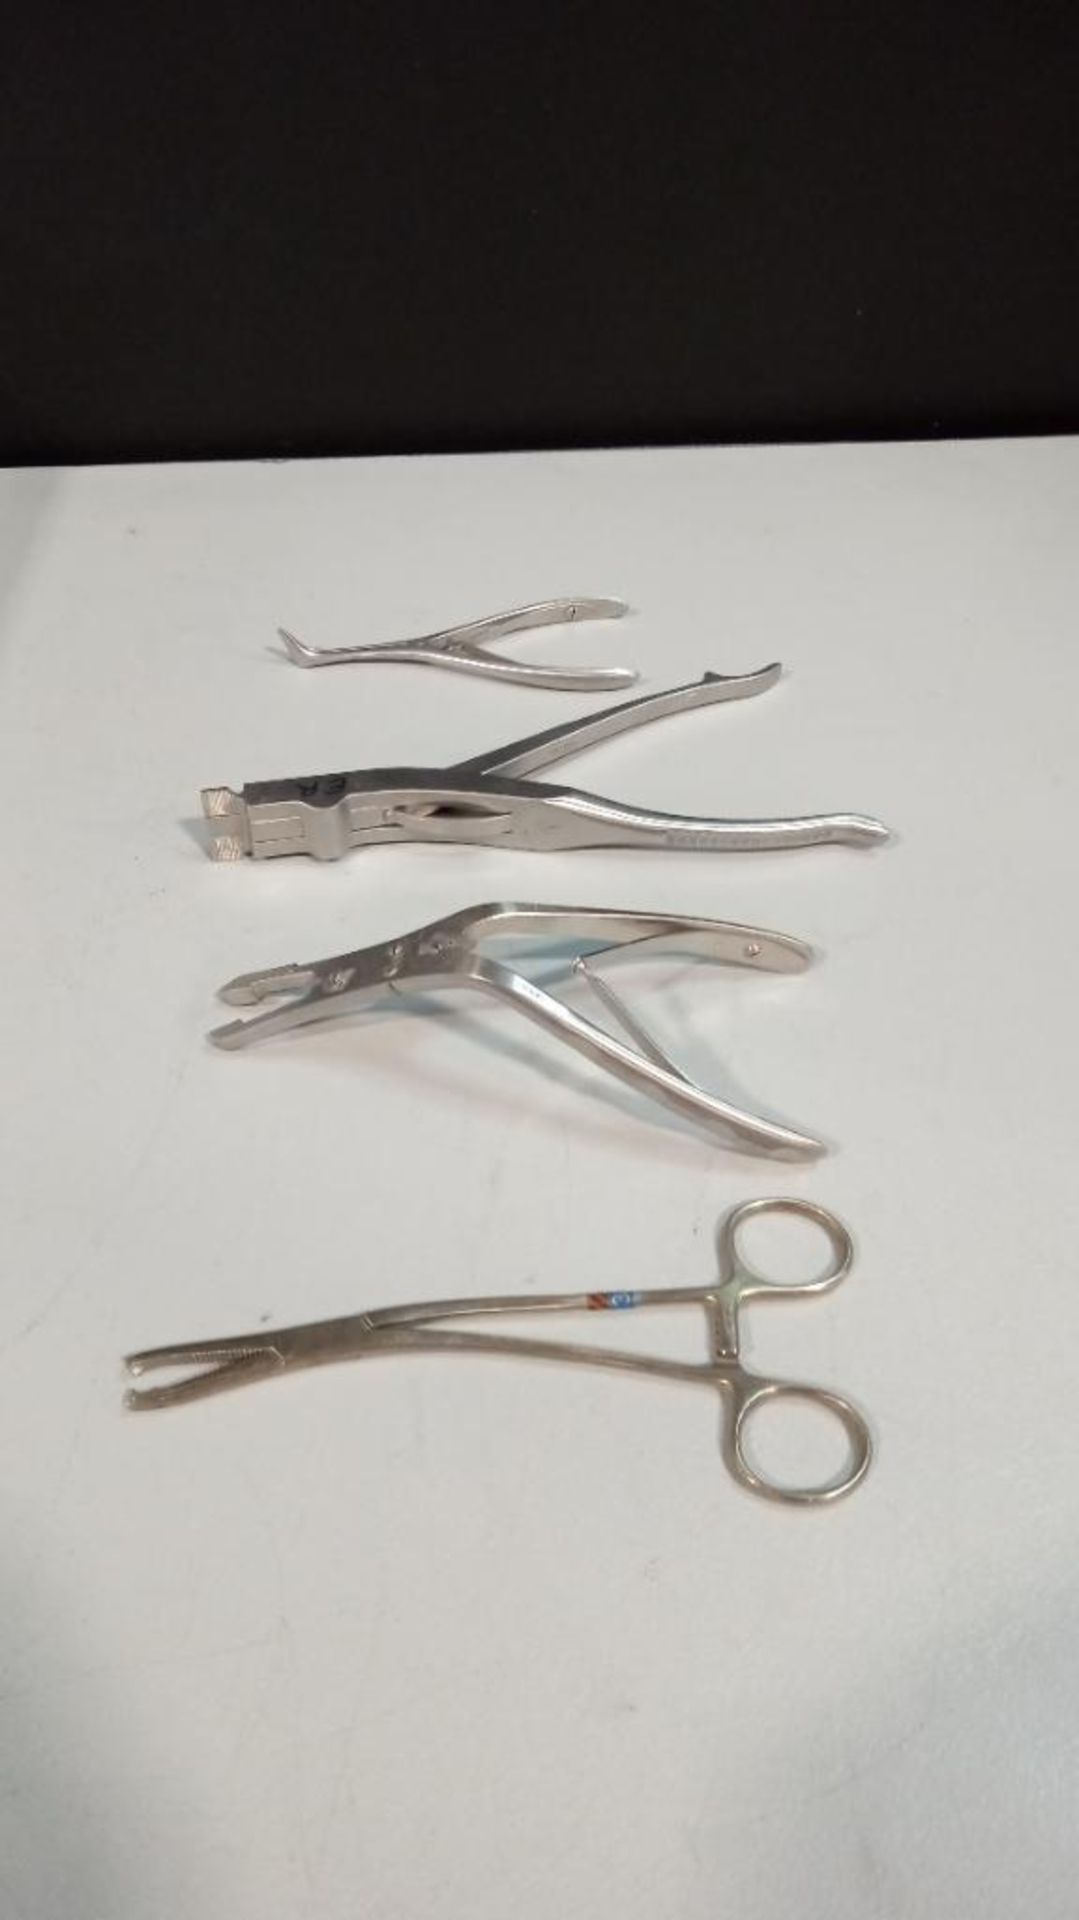 RETRACTOR AND FORCEPS